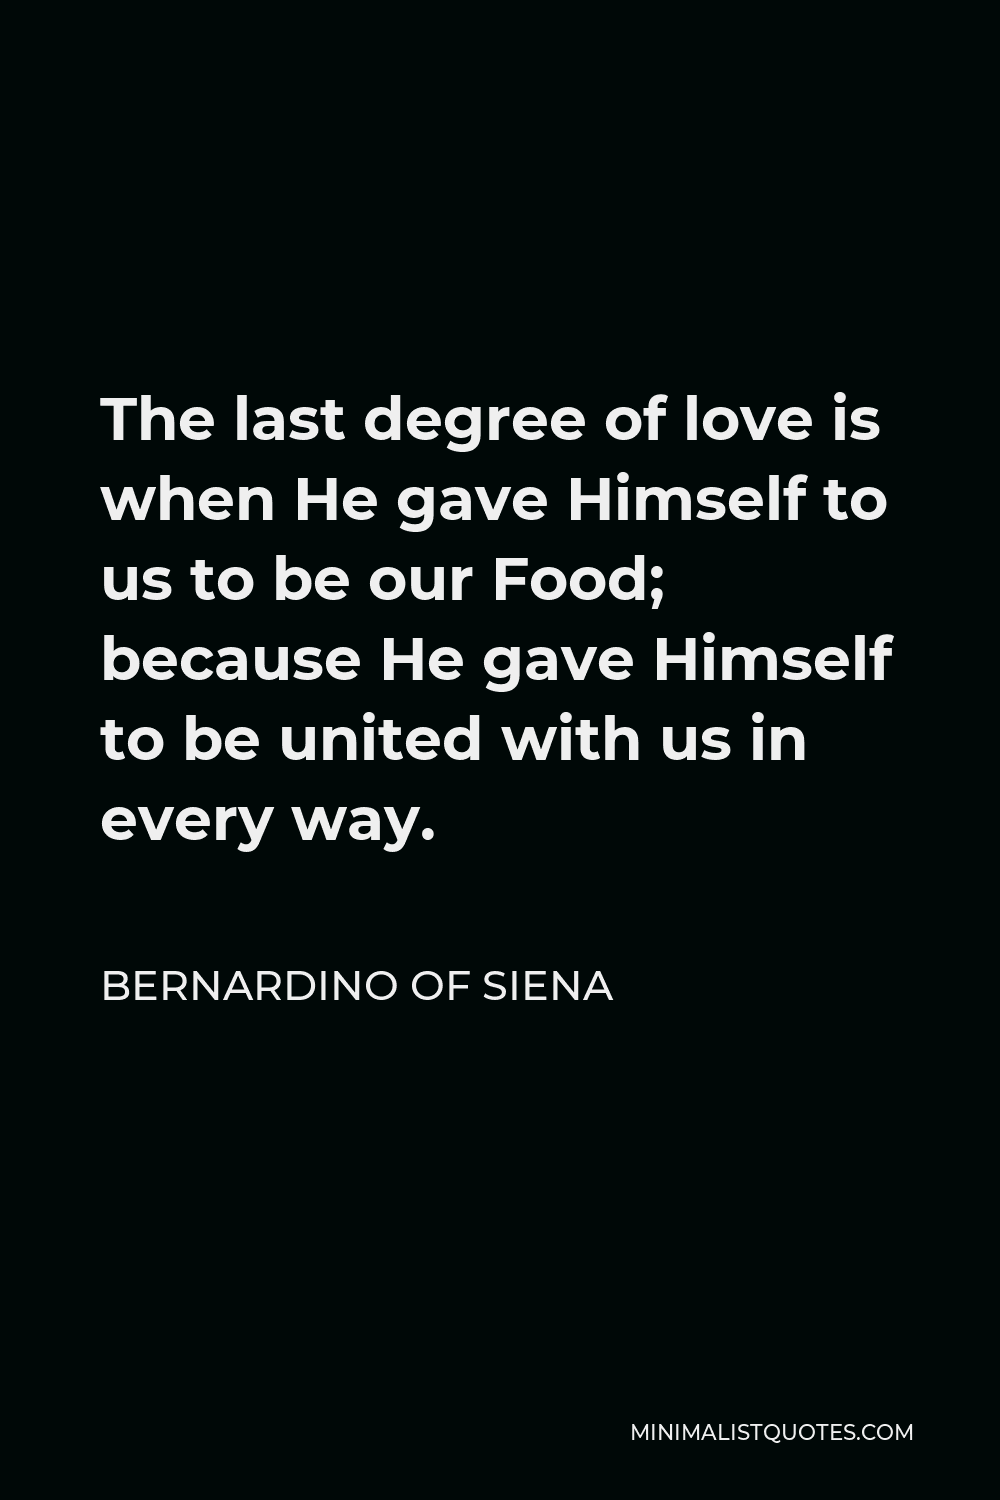 Bernardino of Siena Quote - The last degree of love is when He gave Himself to us to be our Food; because He gave Himself to be united with us in every way.